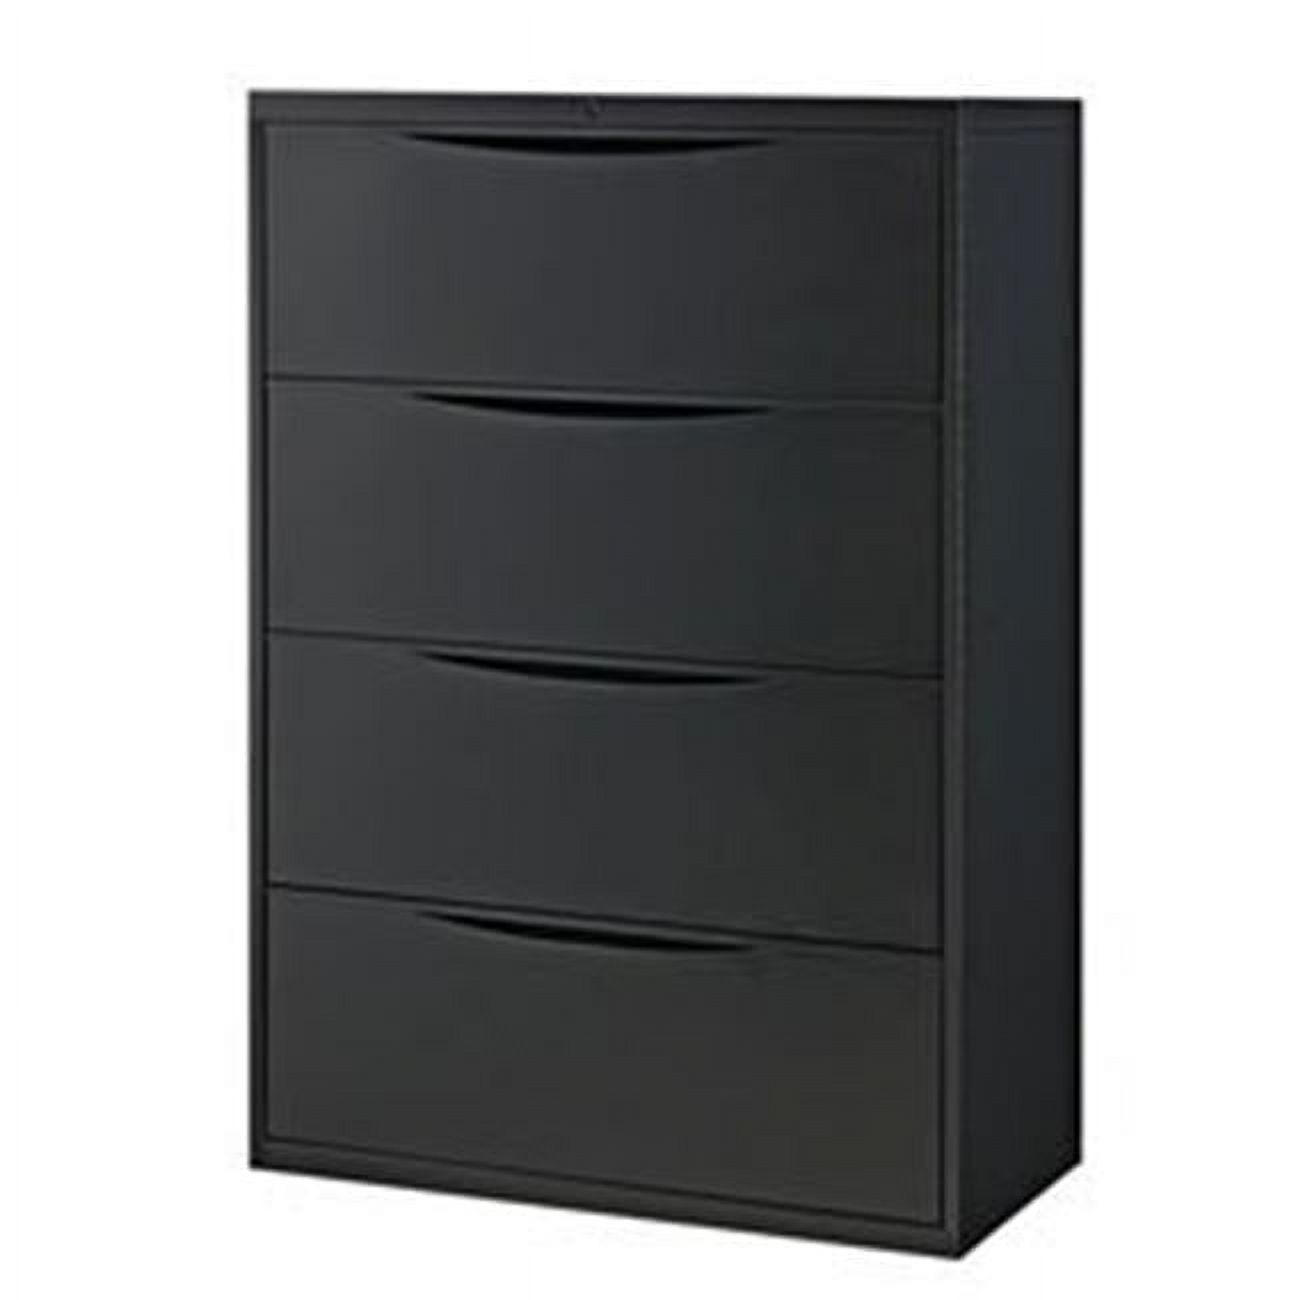 Global Industries 252470BK Interion 36 in. Premium Lateral File Cabinet 4 Drawer, Black - image 1 of 1